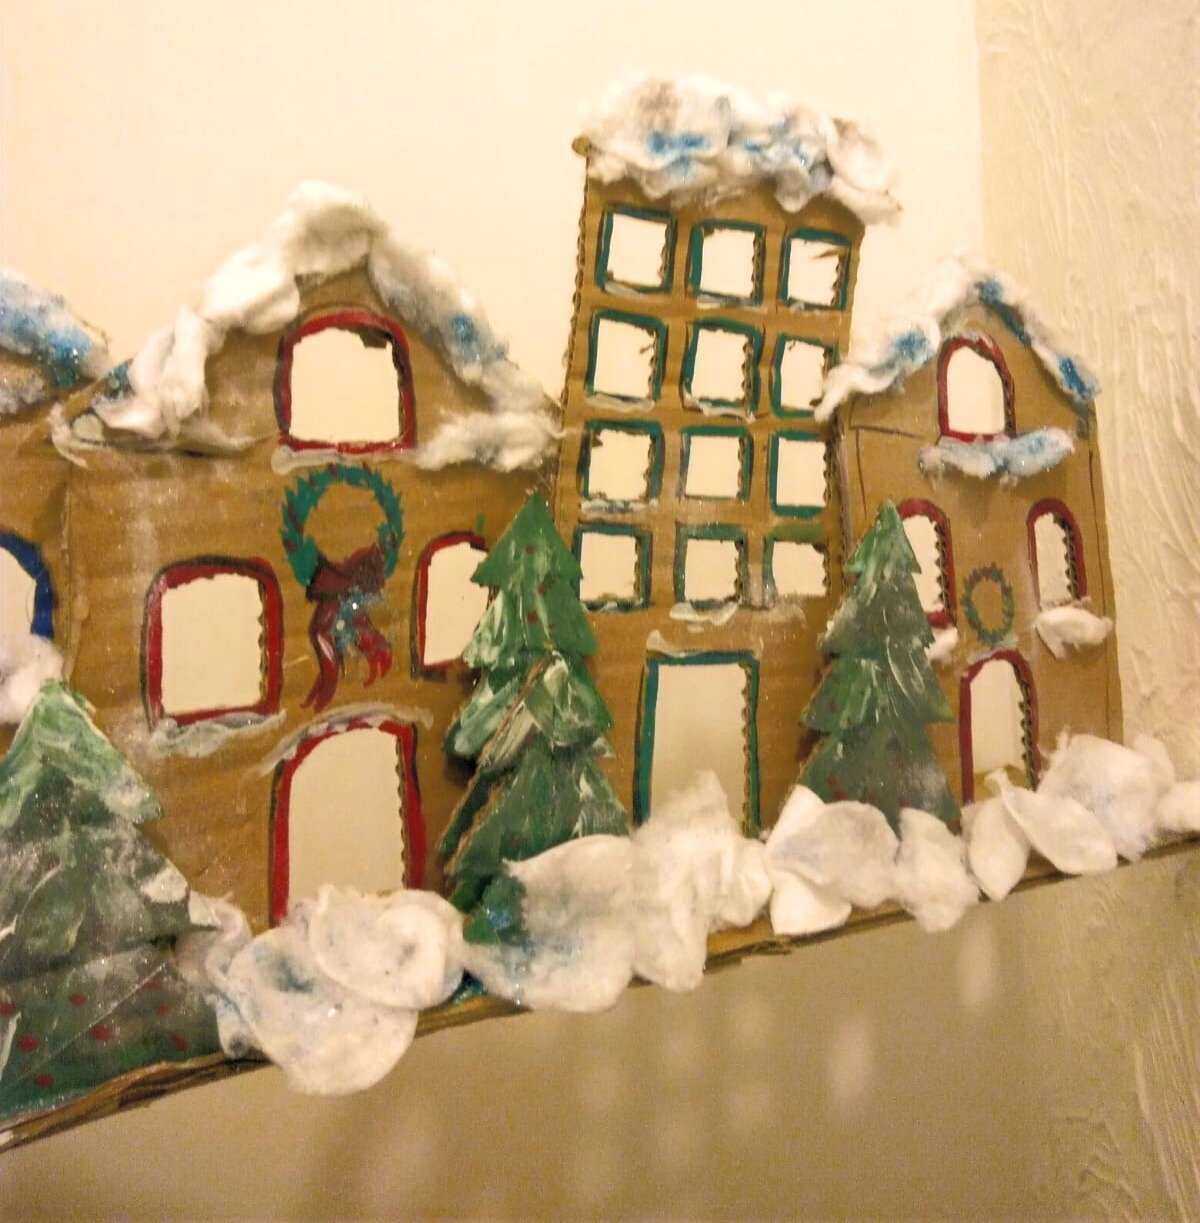 Houses and Christmas trees made from cardboard